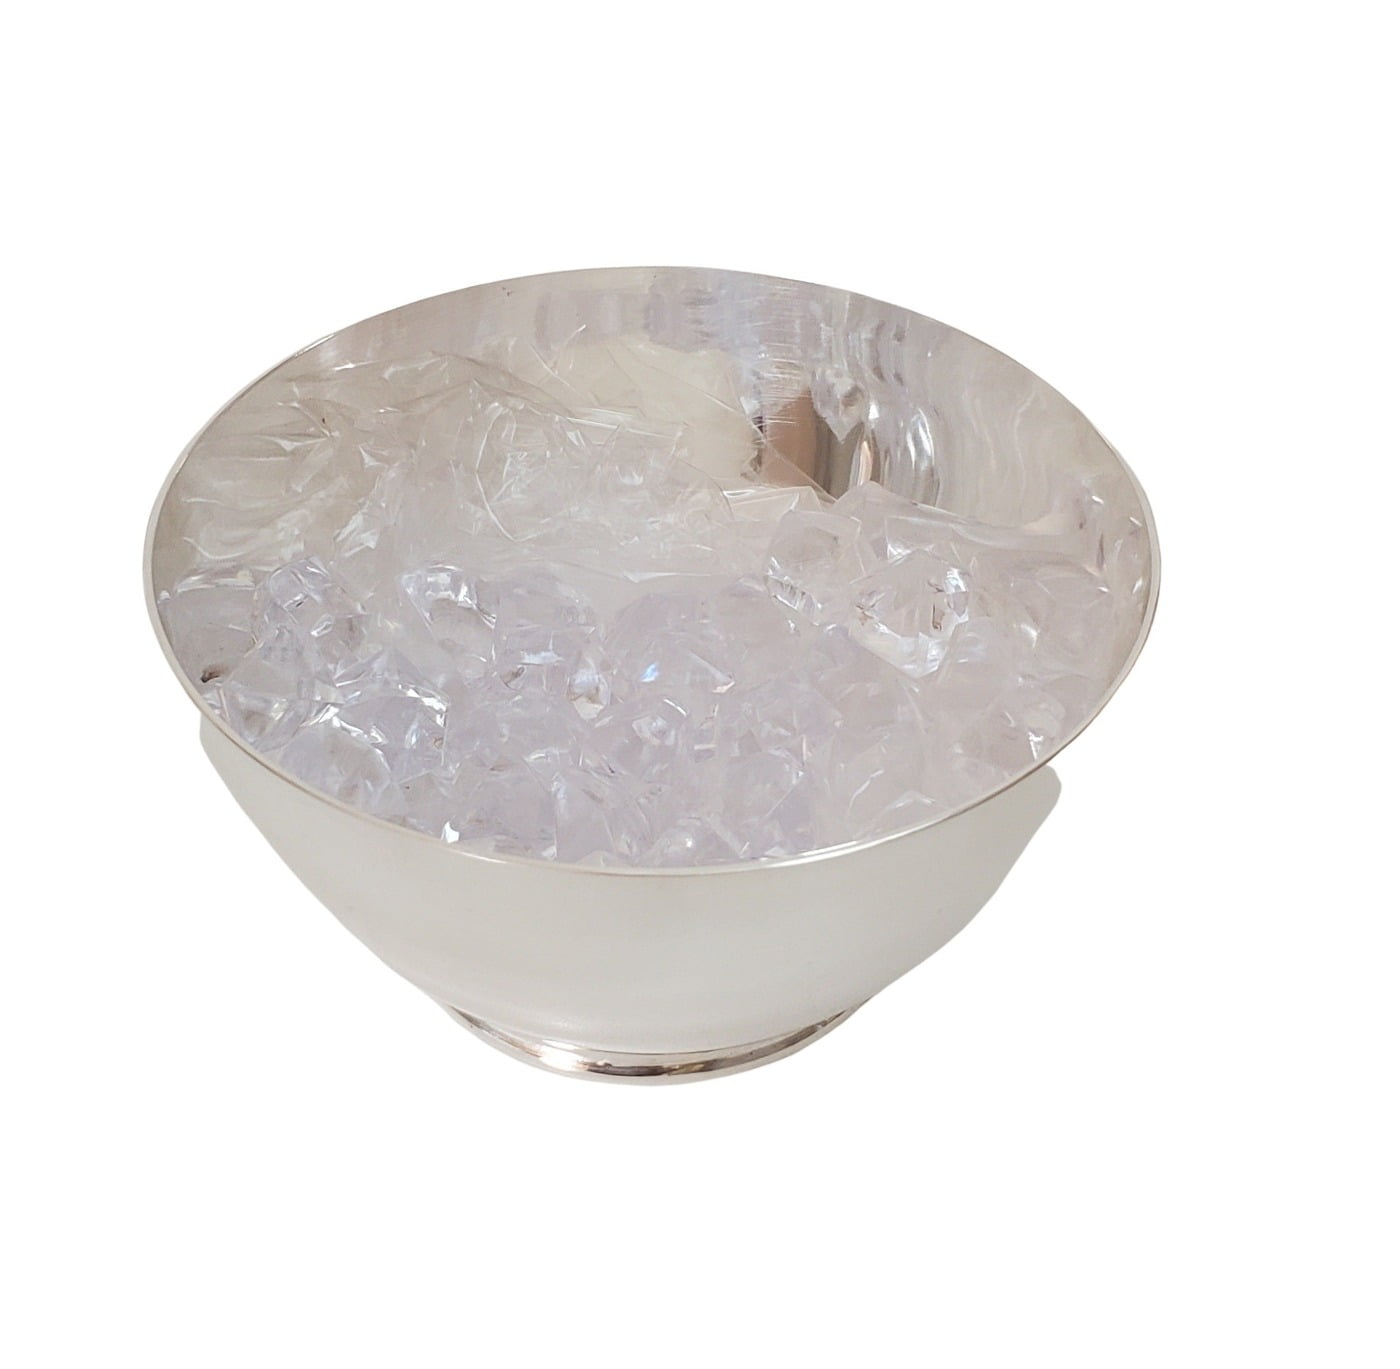 BOWL WITH CAVIAR GLASS INSERT